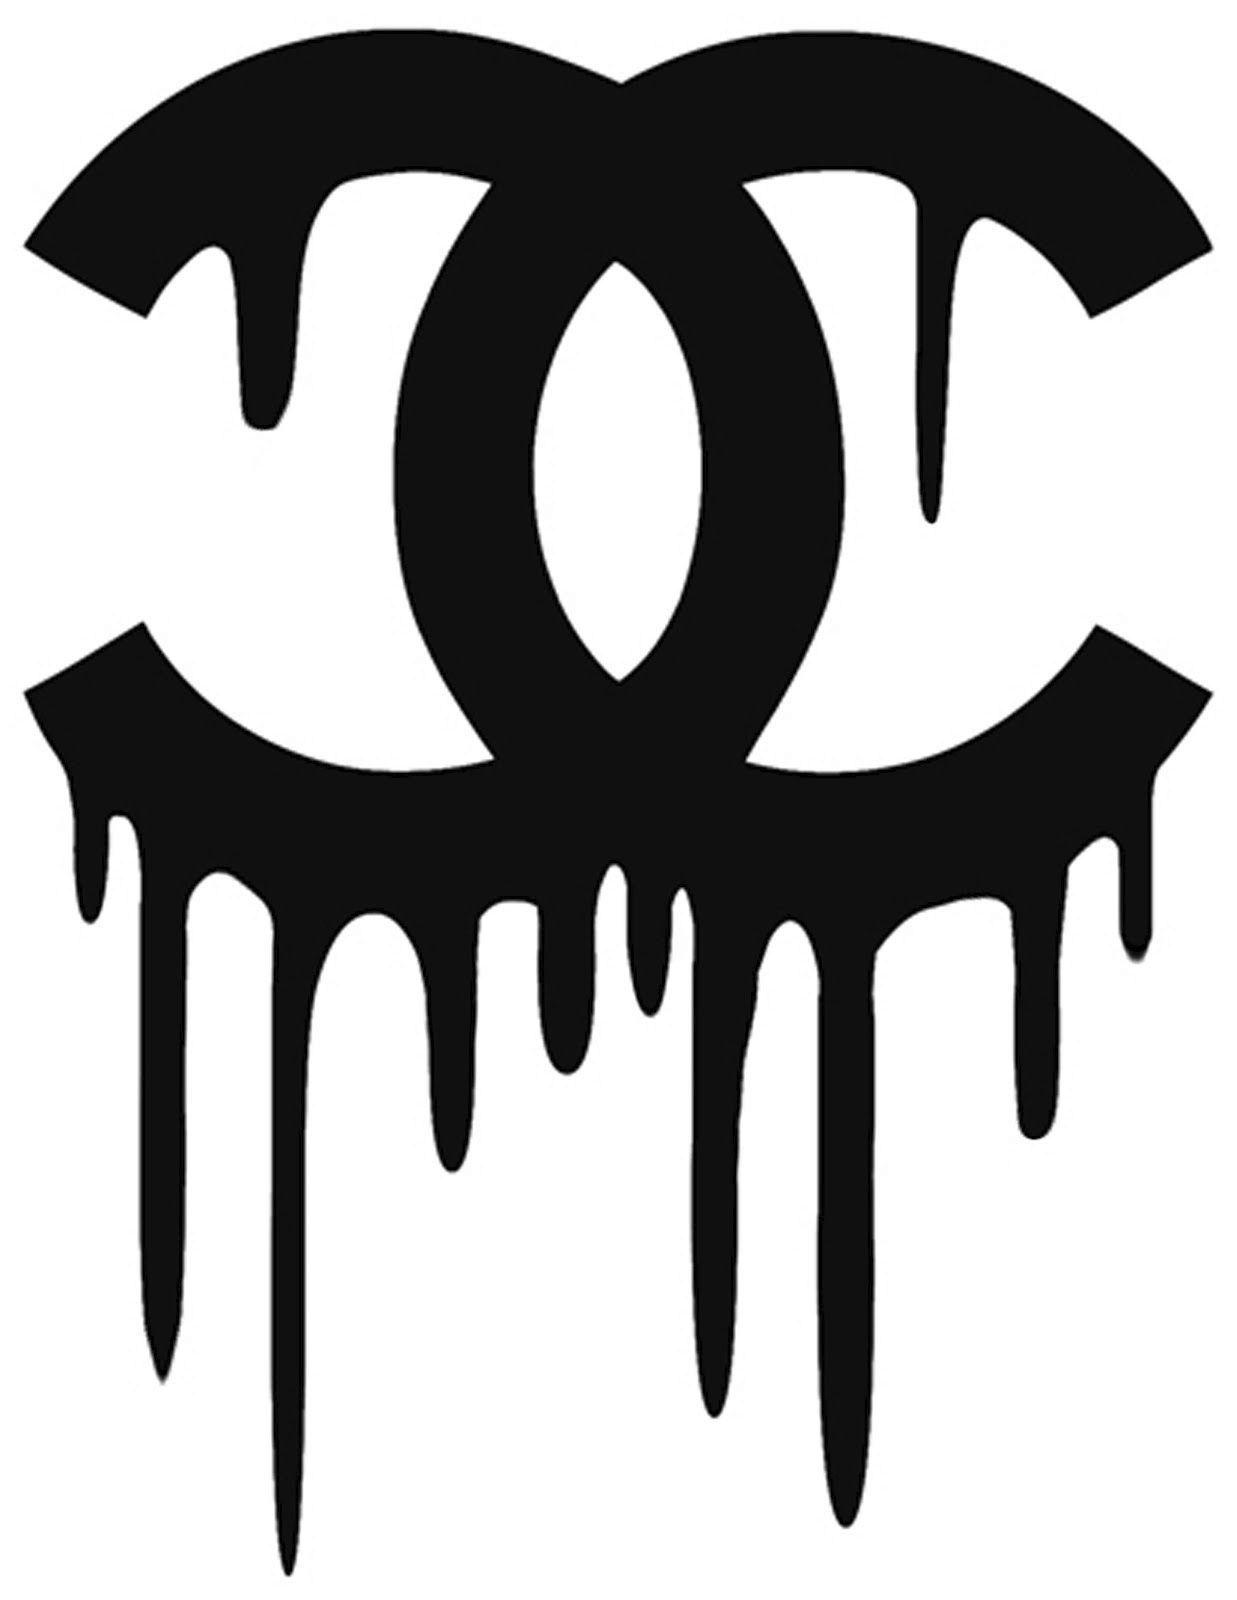 Drip Logo - Here is another quick and easy DIY. I have been wanting a Chanel